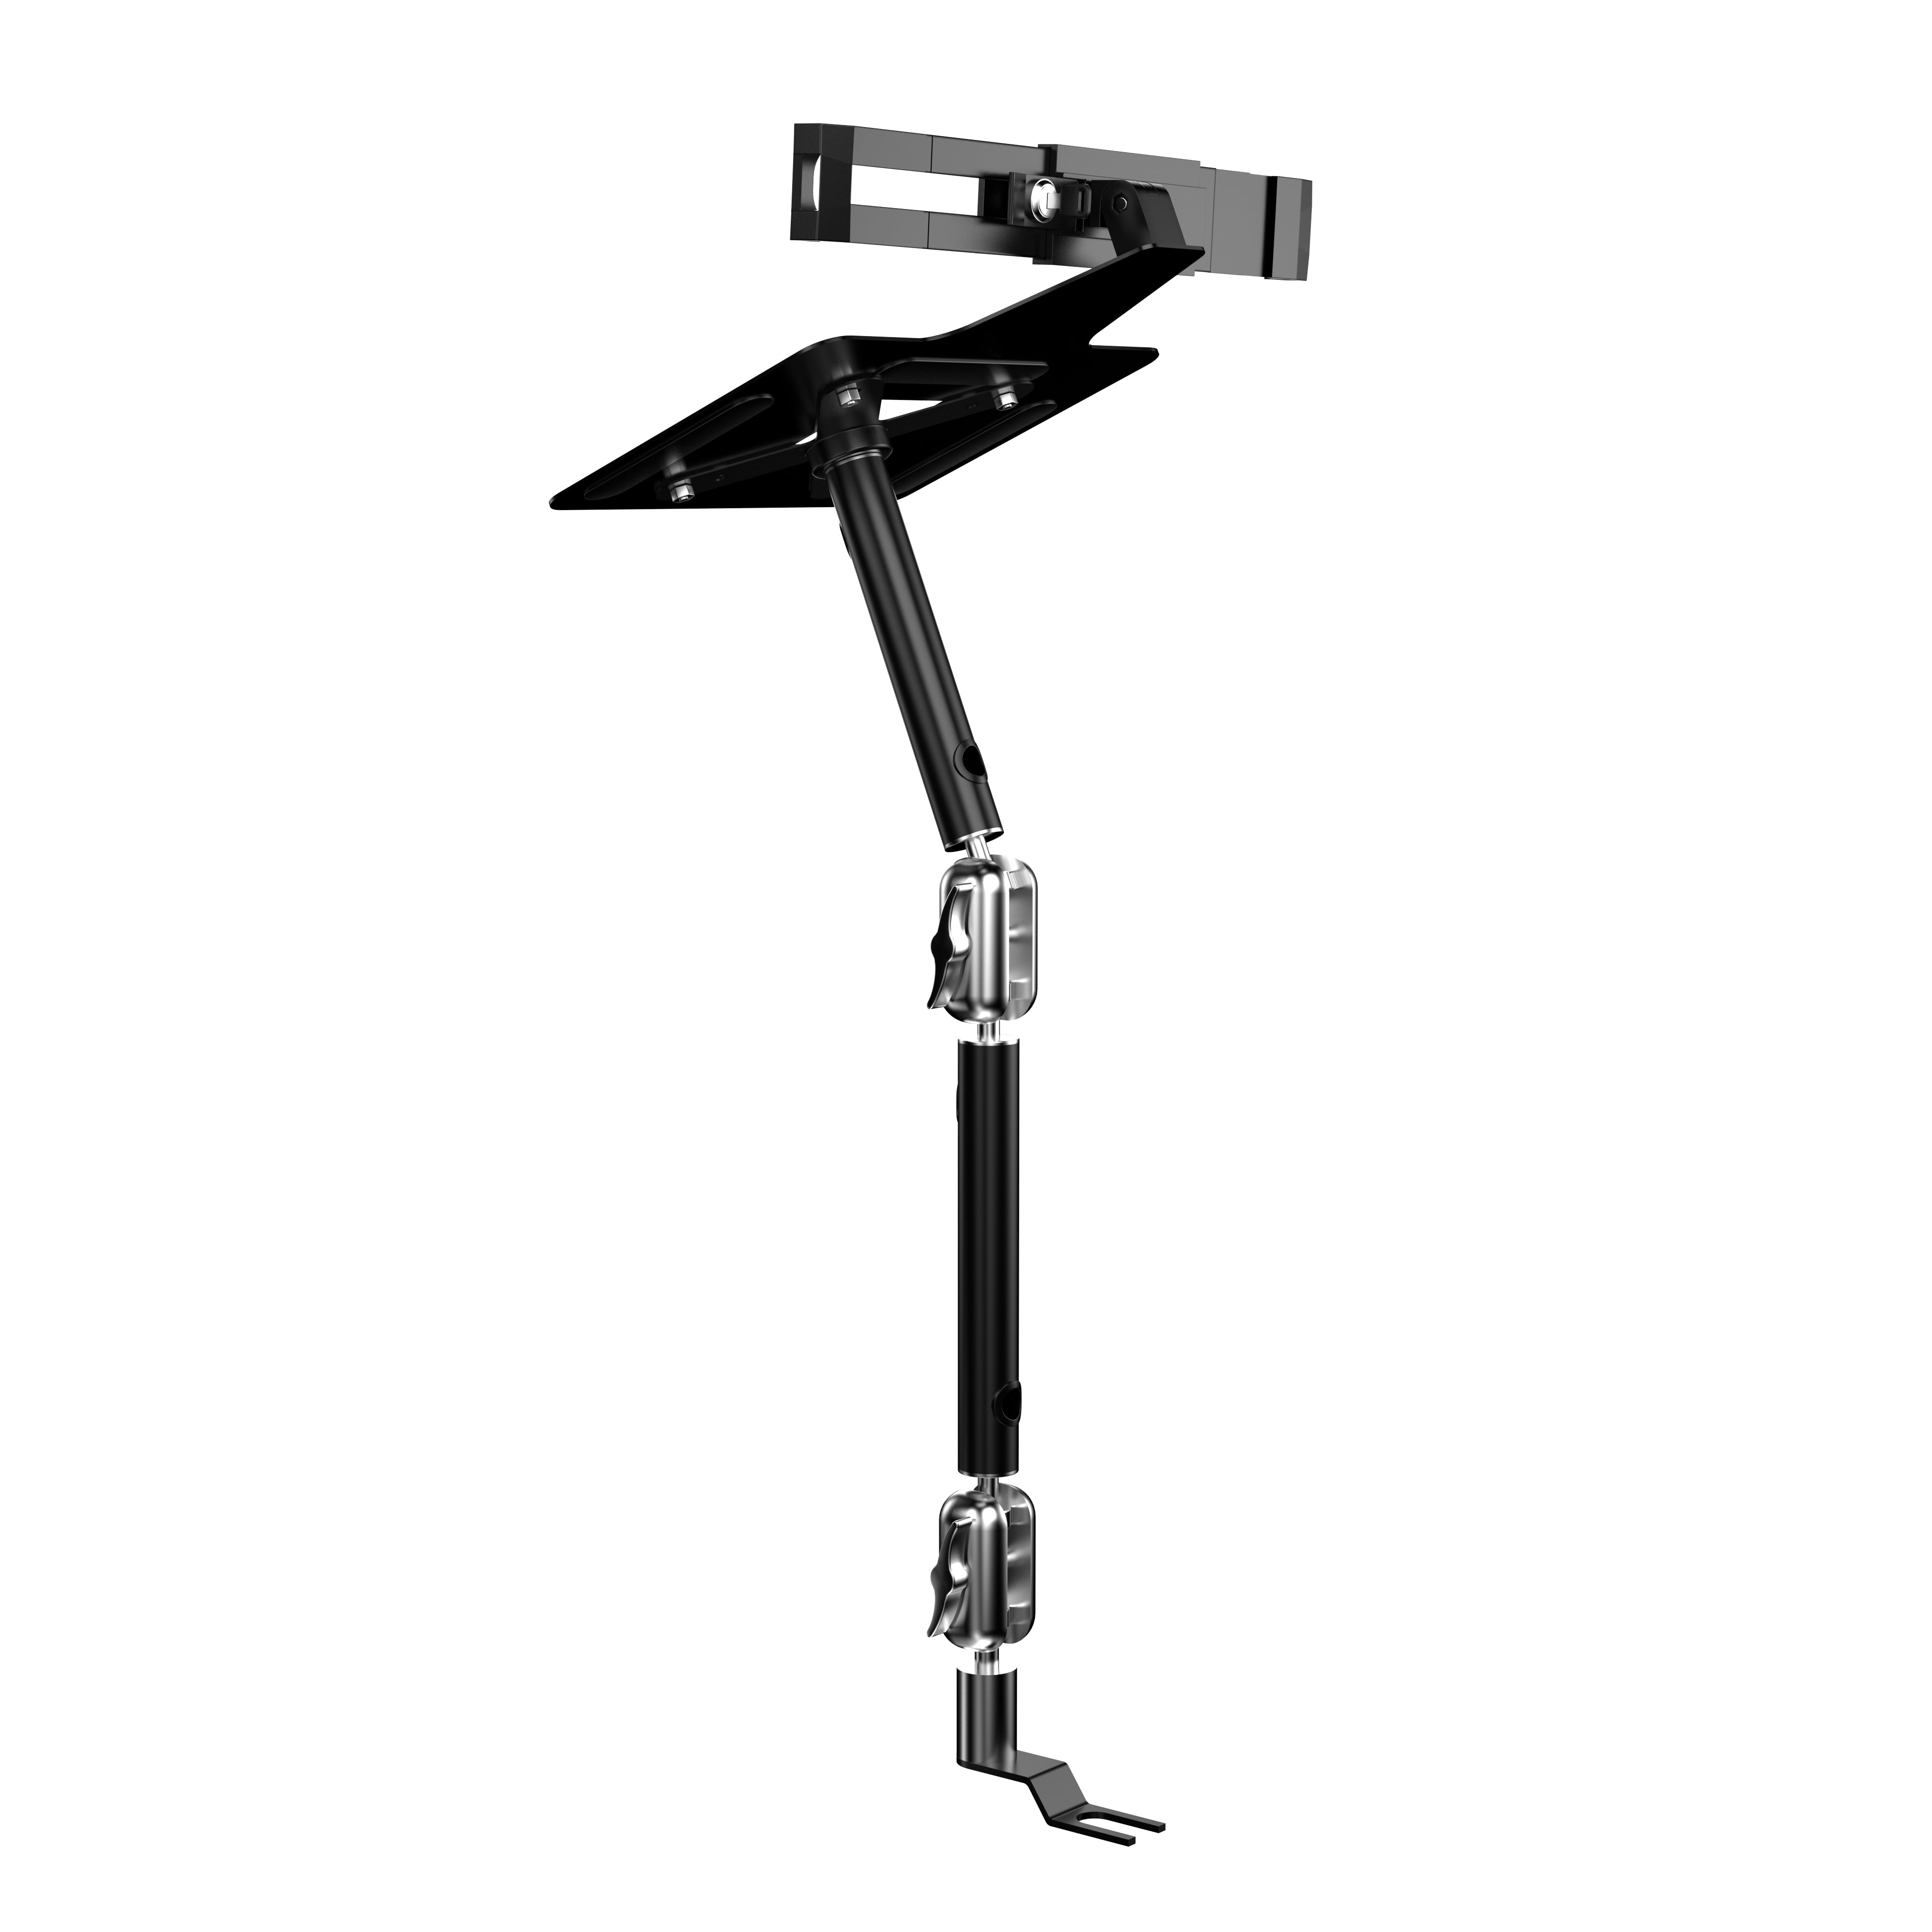 Laptop Security Arm with VESA Mounting Base for Vehicles